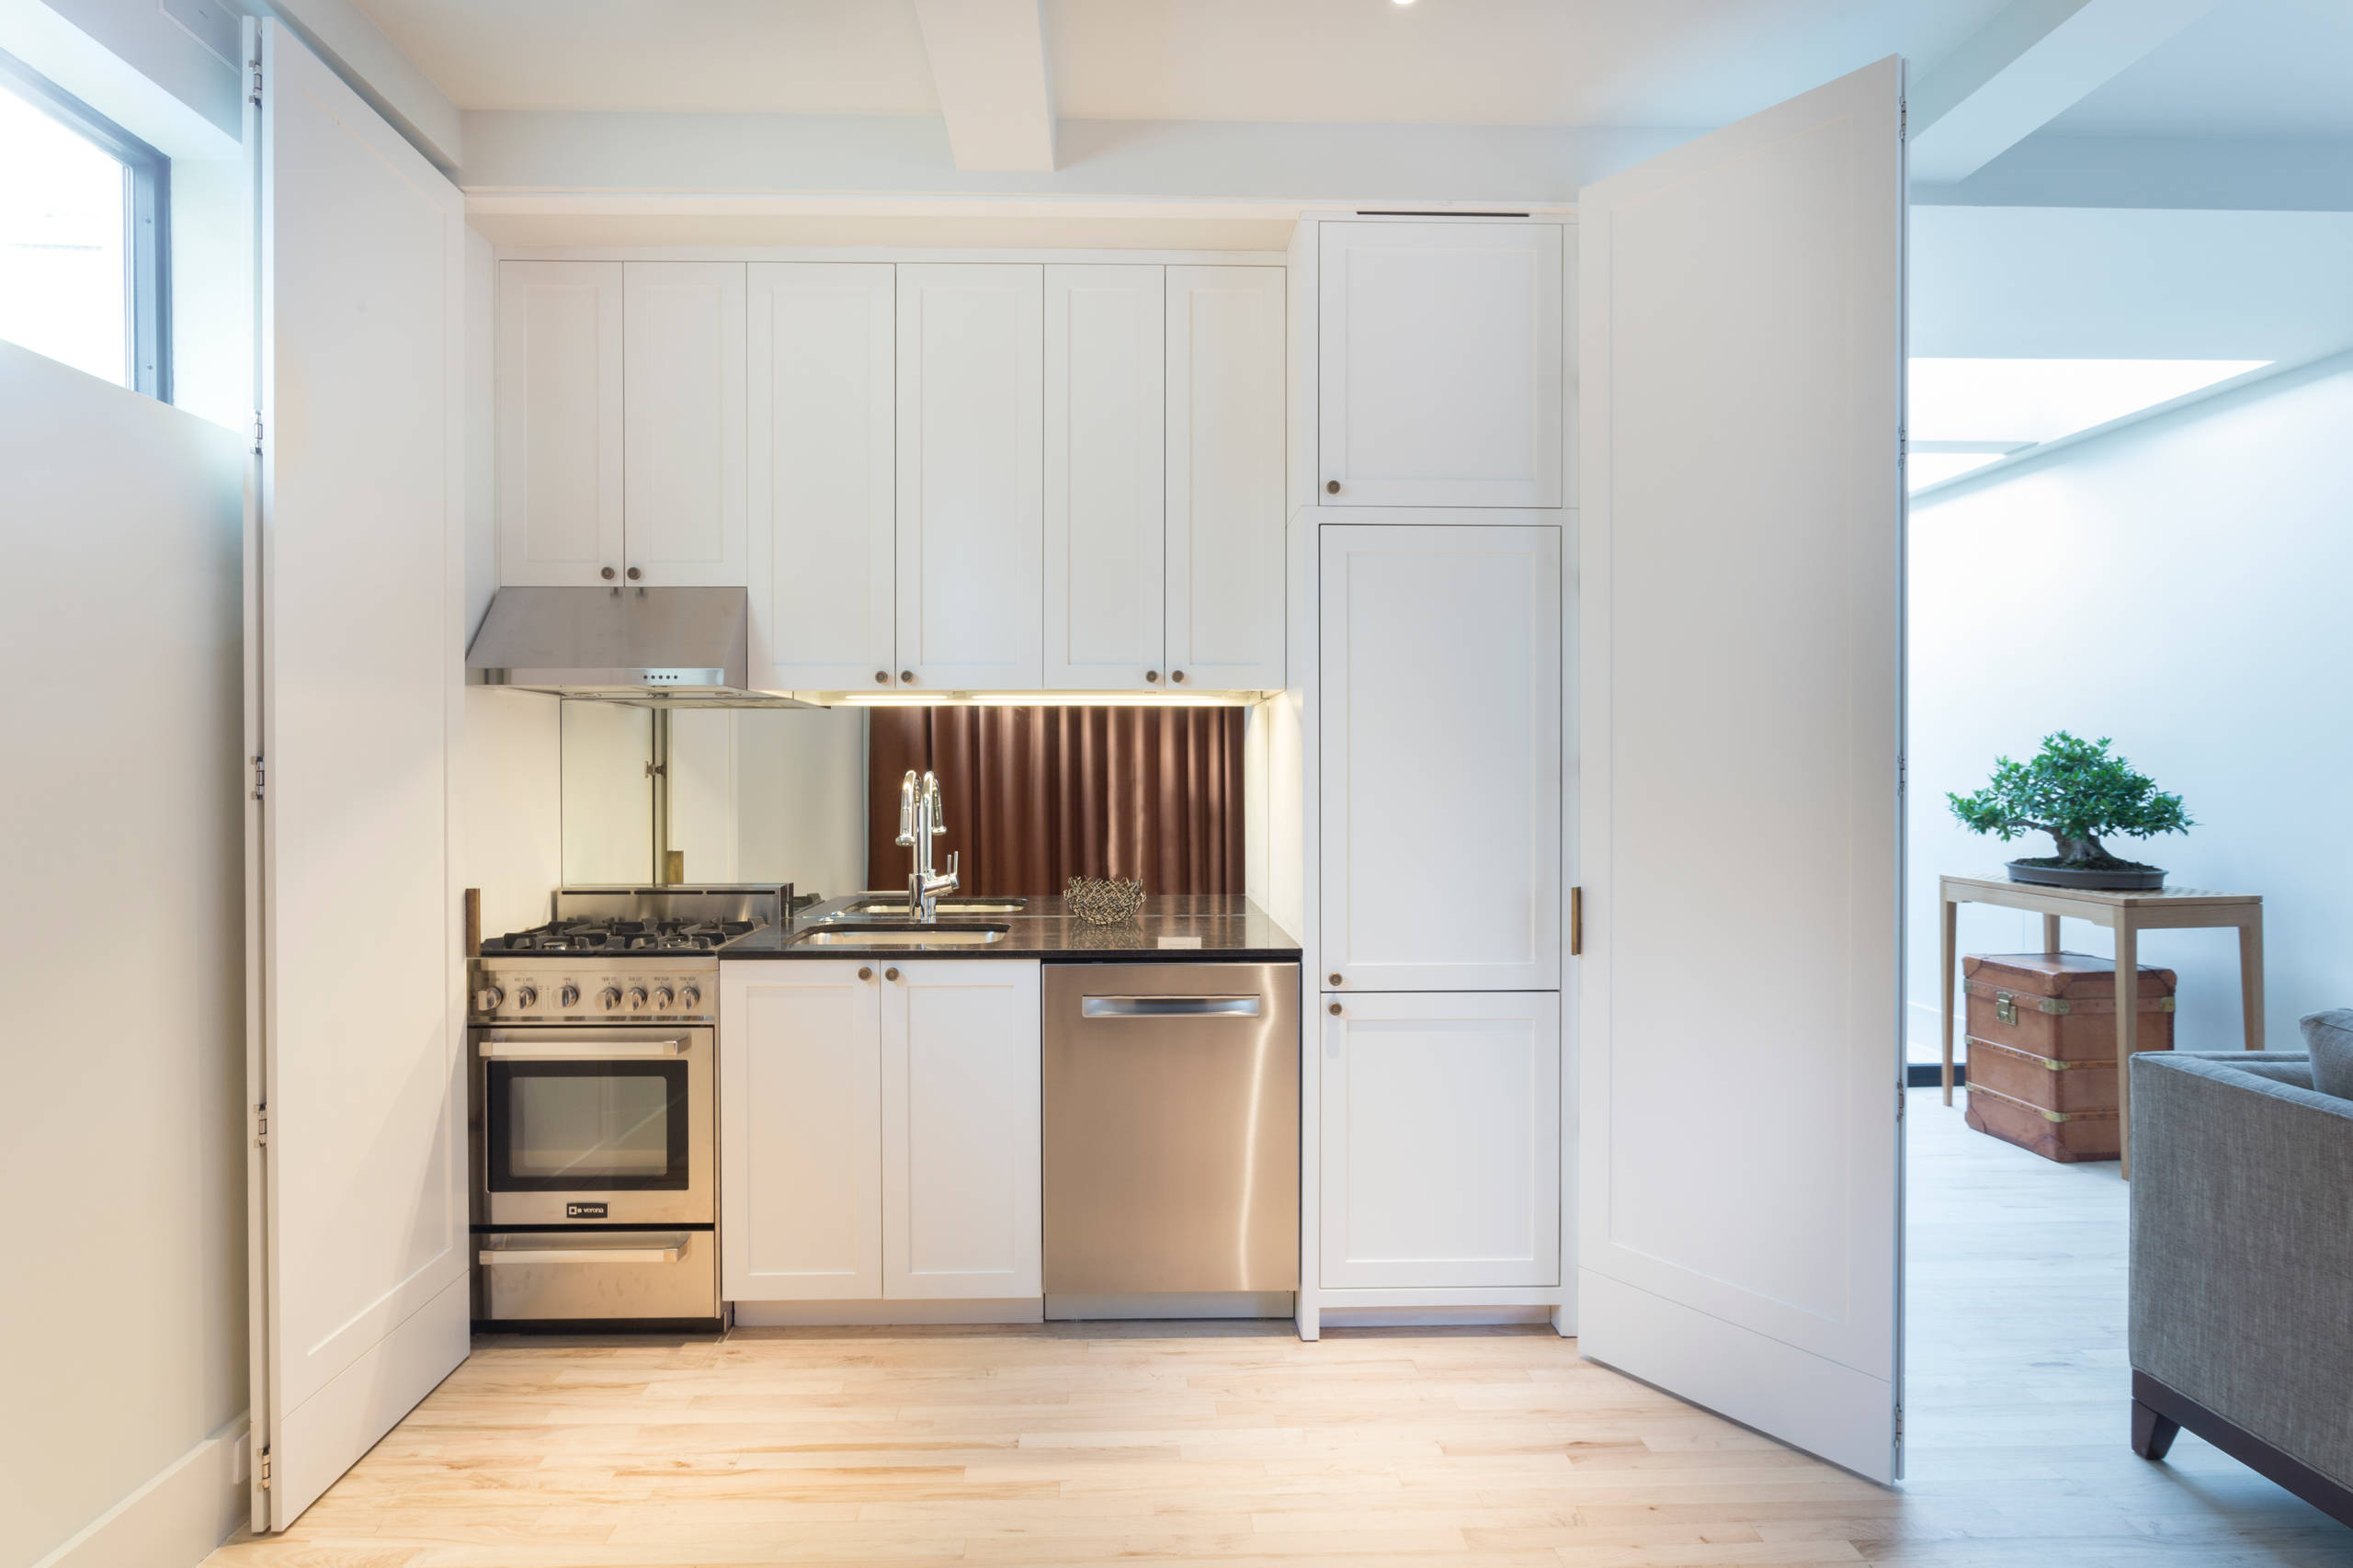 18 Tiny Micro Kitchens for Small Space Living   Houzz UK